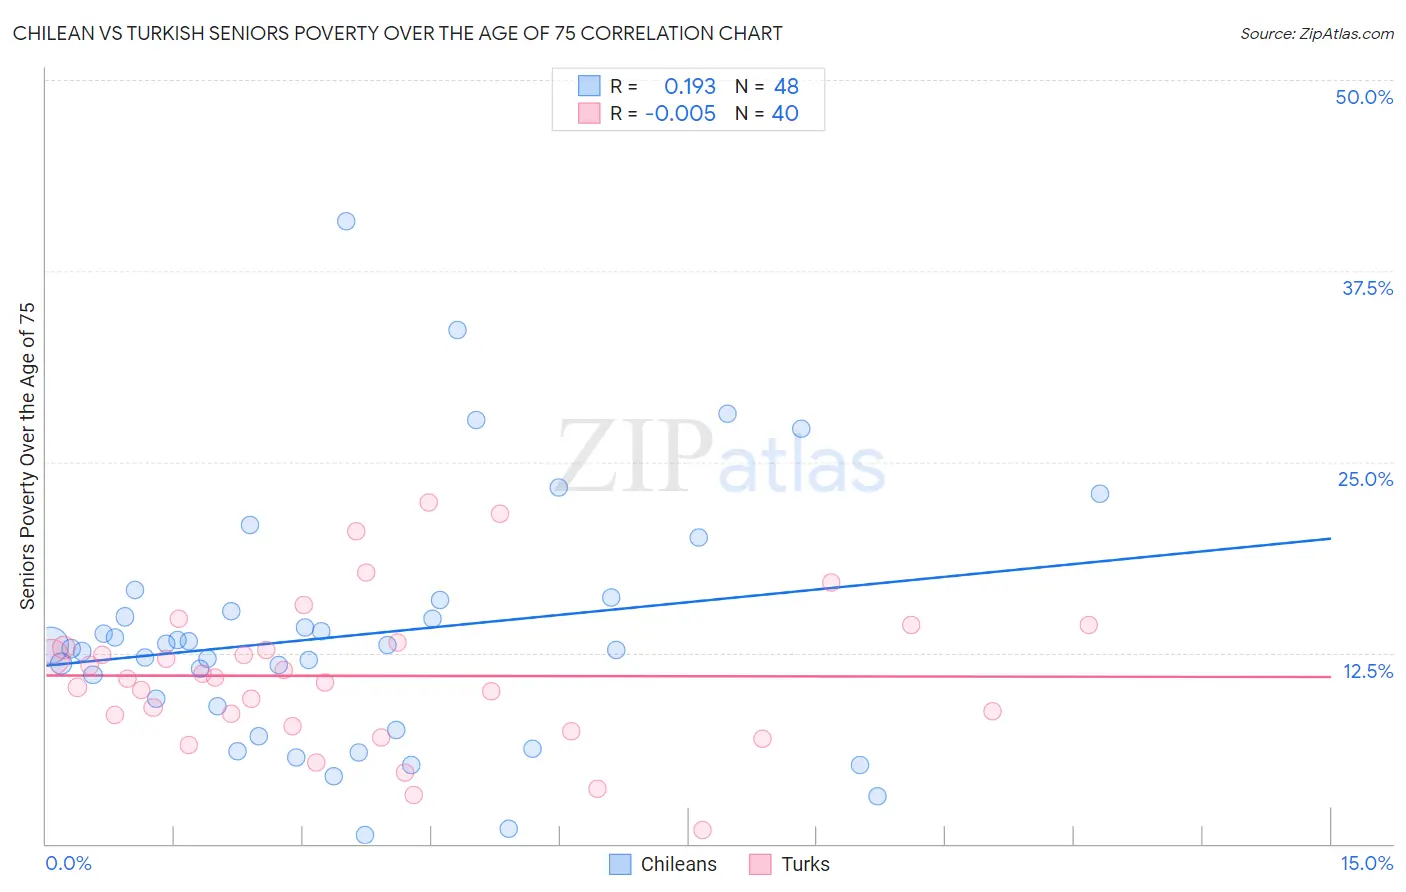 Chilean vs Turkish Seniors Poverty Over the Age of 75